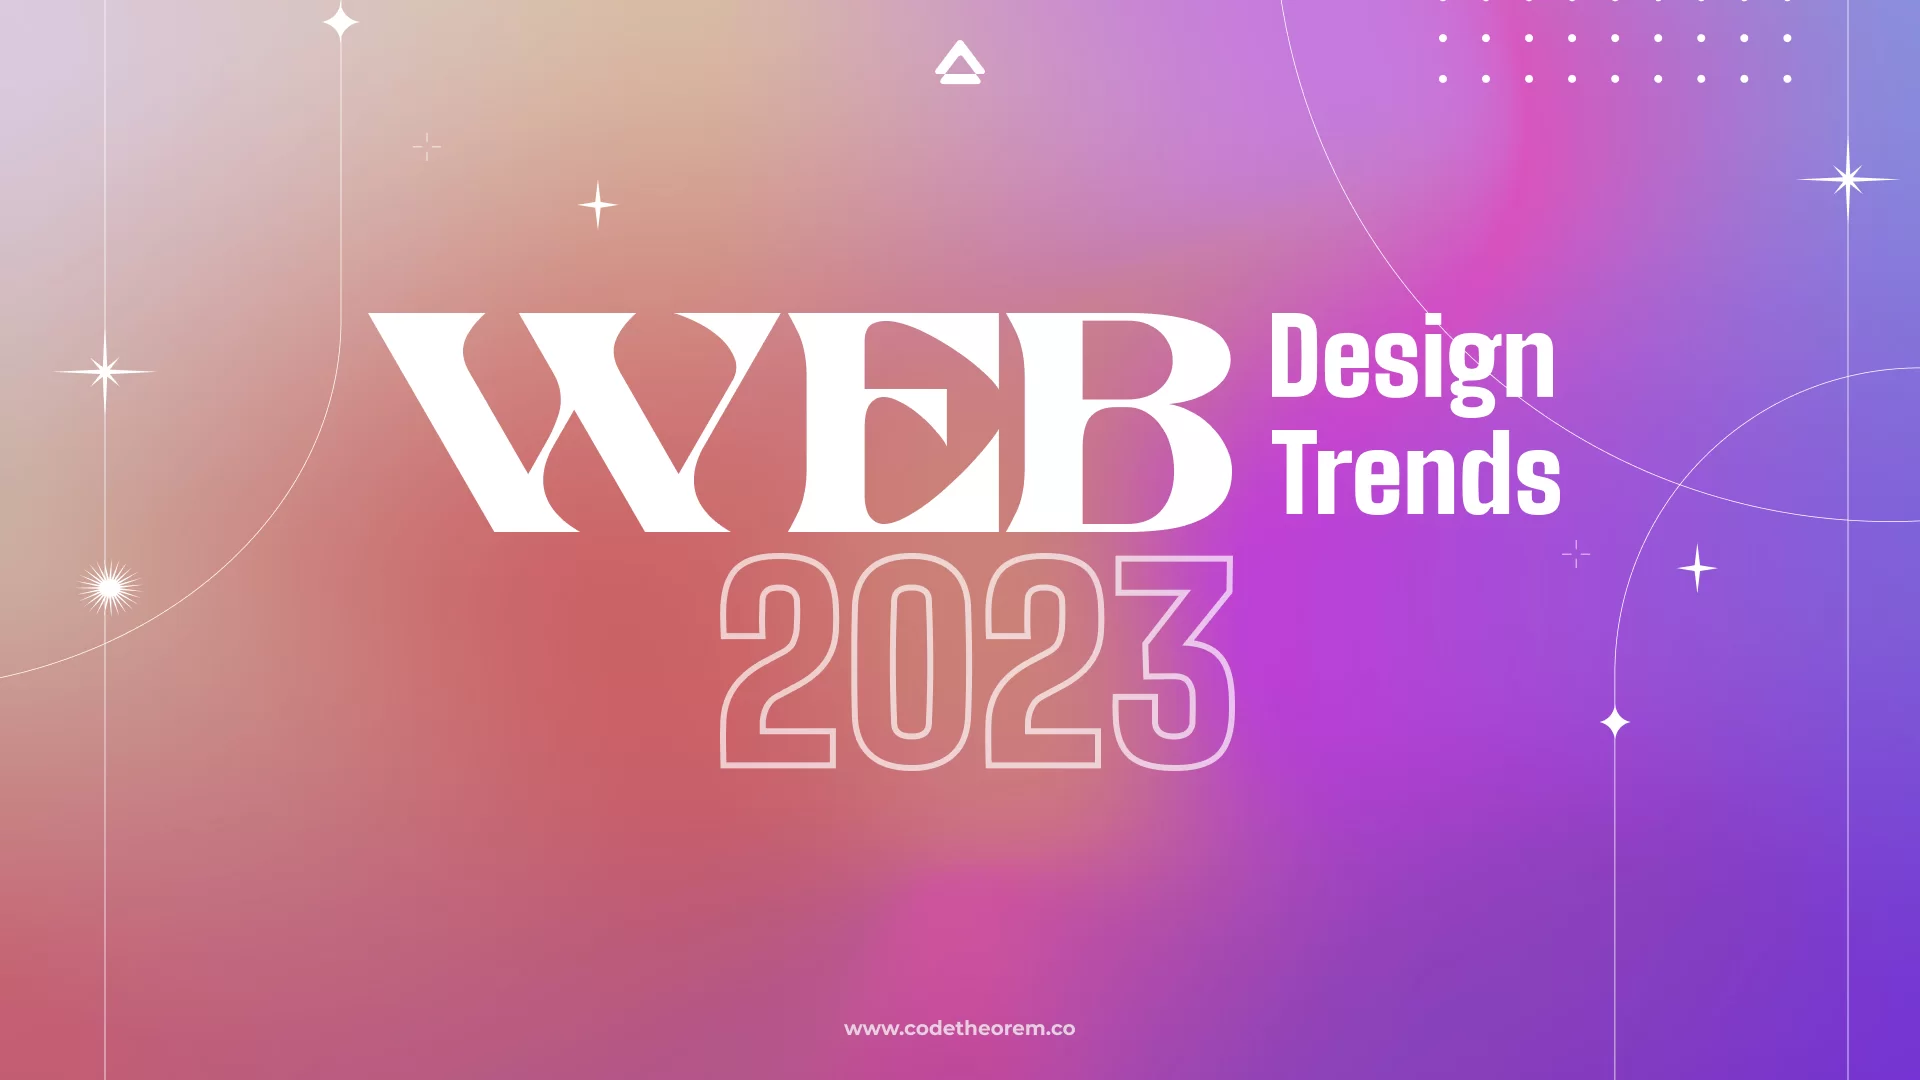 You are currently viewing Web Design Trends: Aesthetic and Functional Evolution